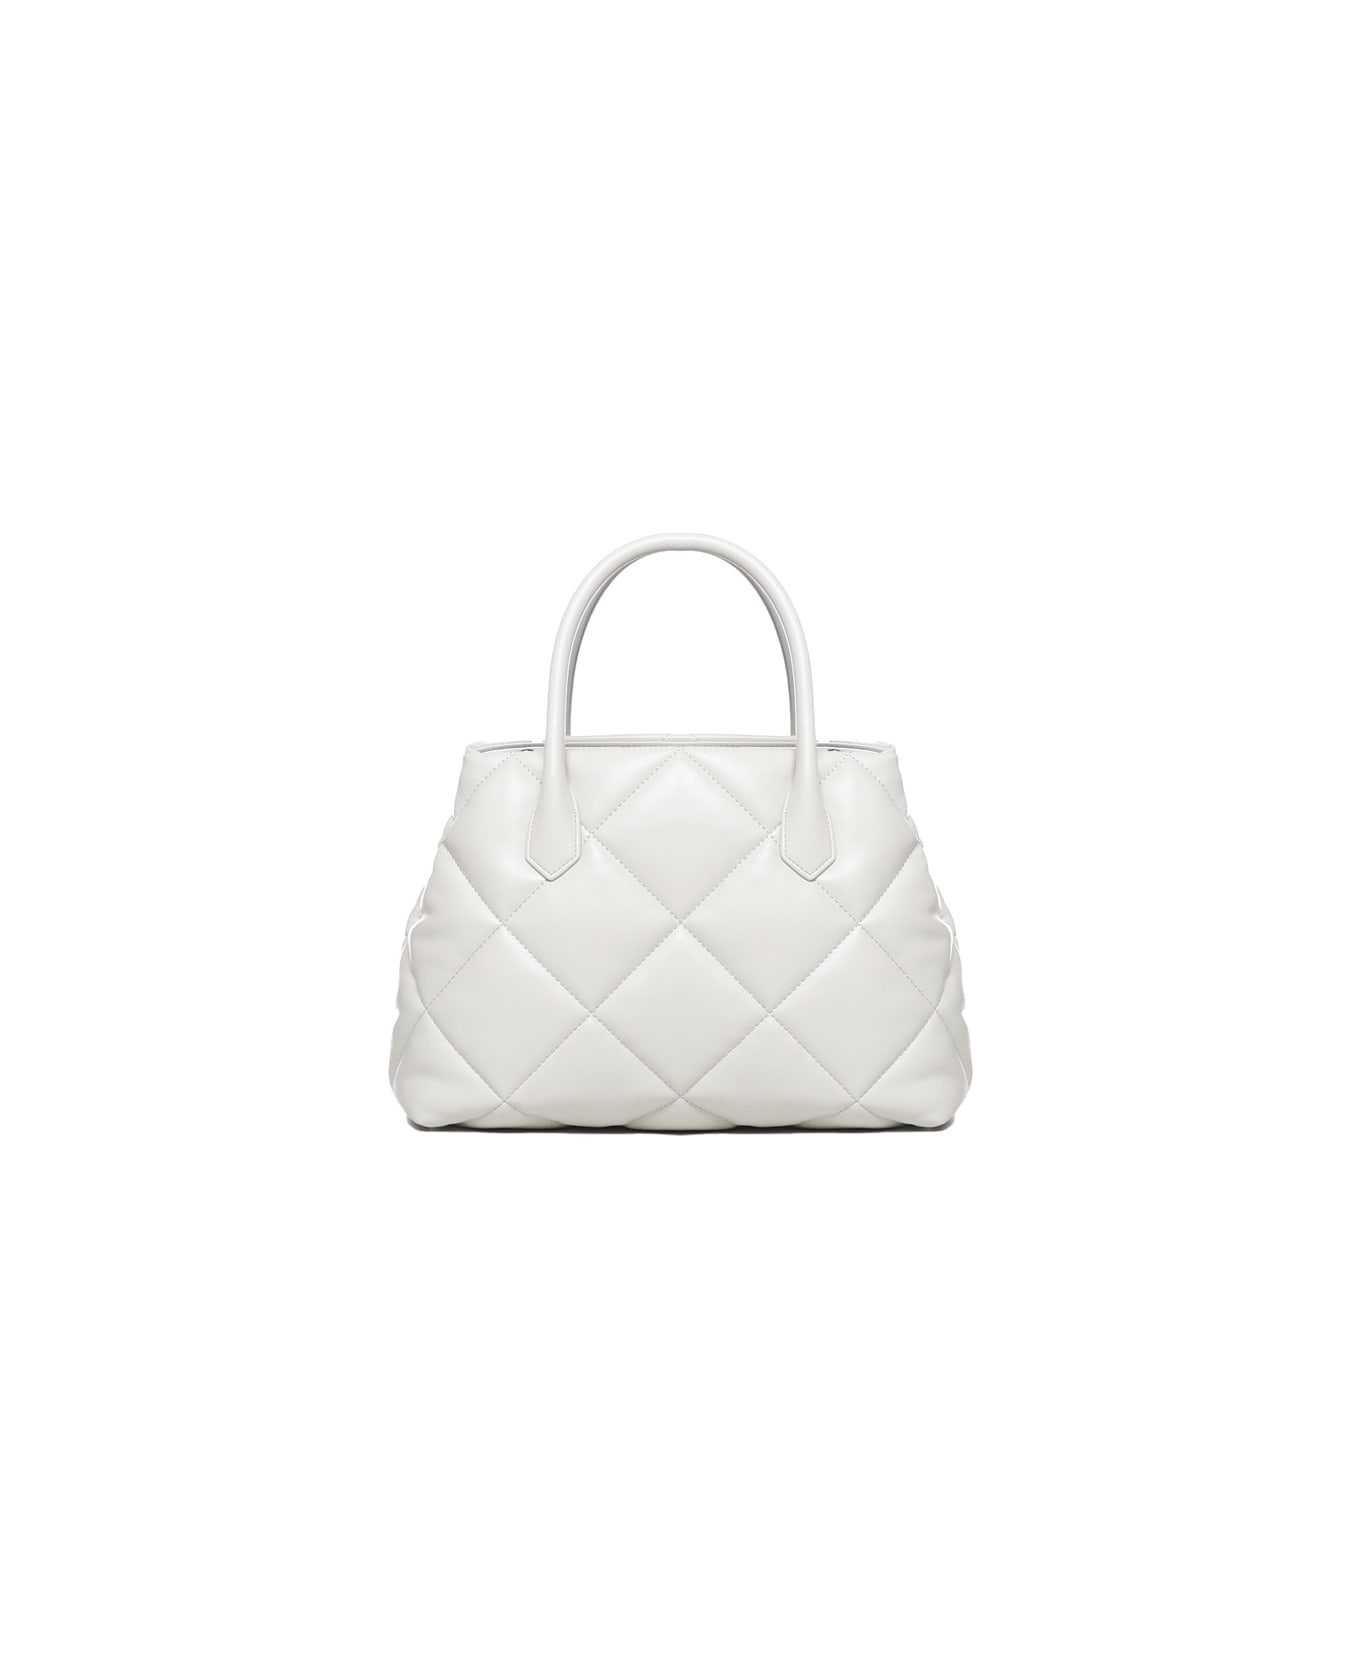 Emporio Armani Quilted Effect Hand Bag - White トートバッグ